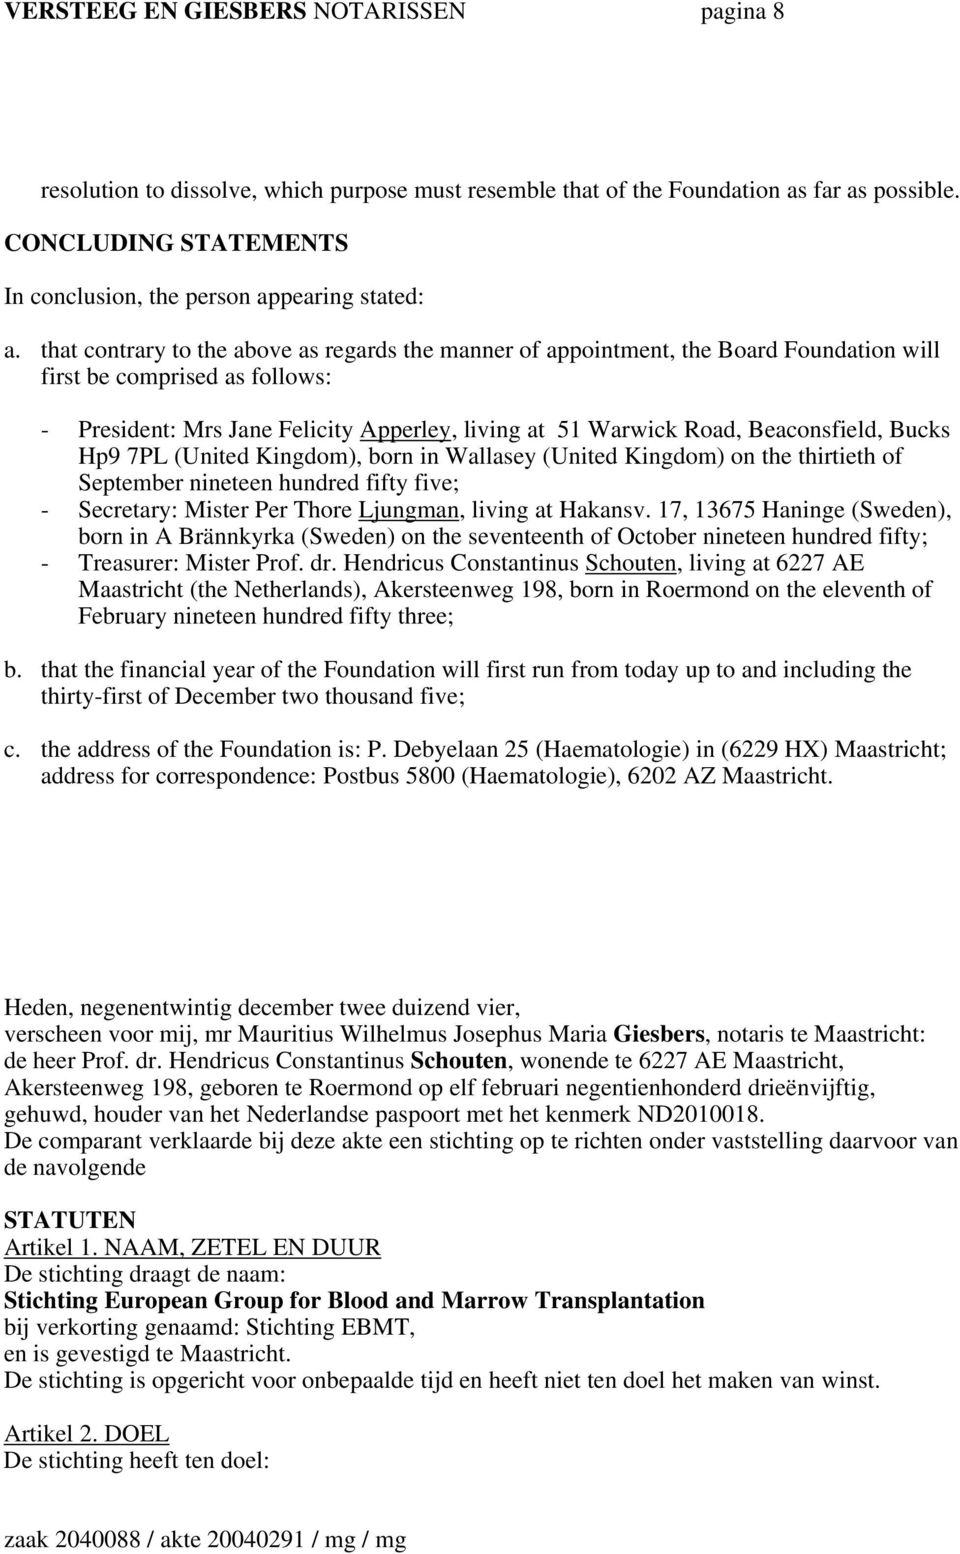 that contrary to the above as regards the manner of appointment, the Board Foundation will first be comprised as follows: - President: Mrs Jane Felicity Apperley, living at 51 Warwick Road,